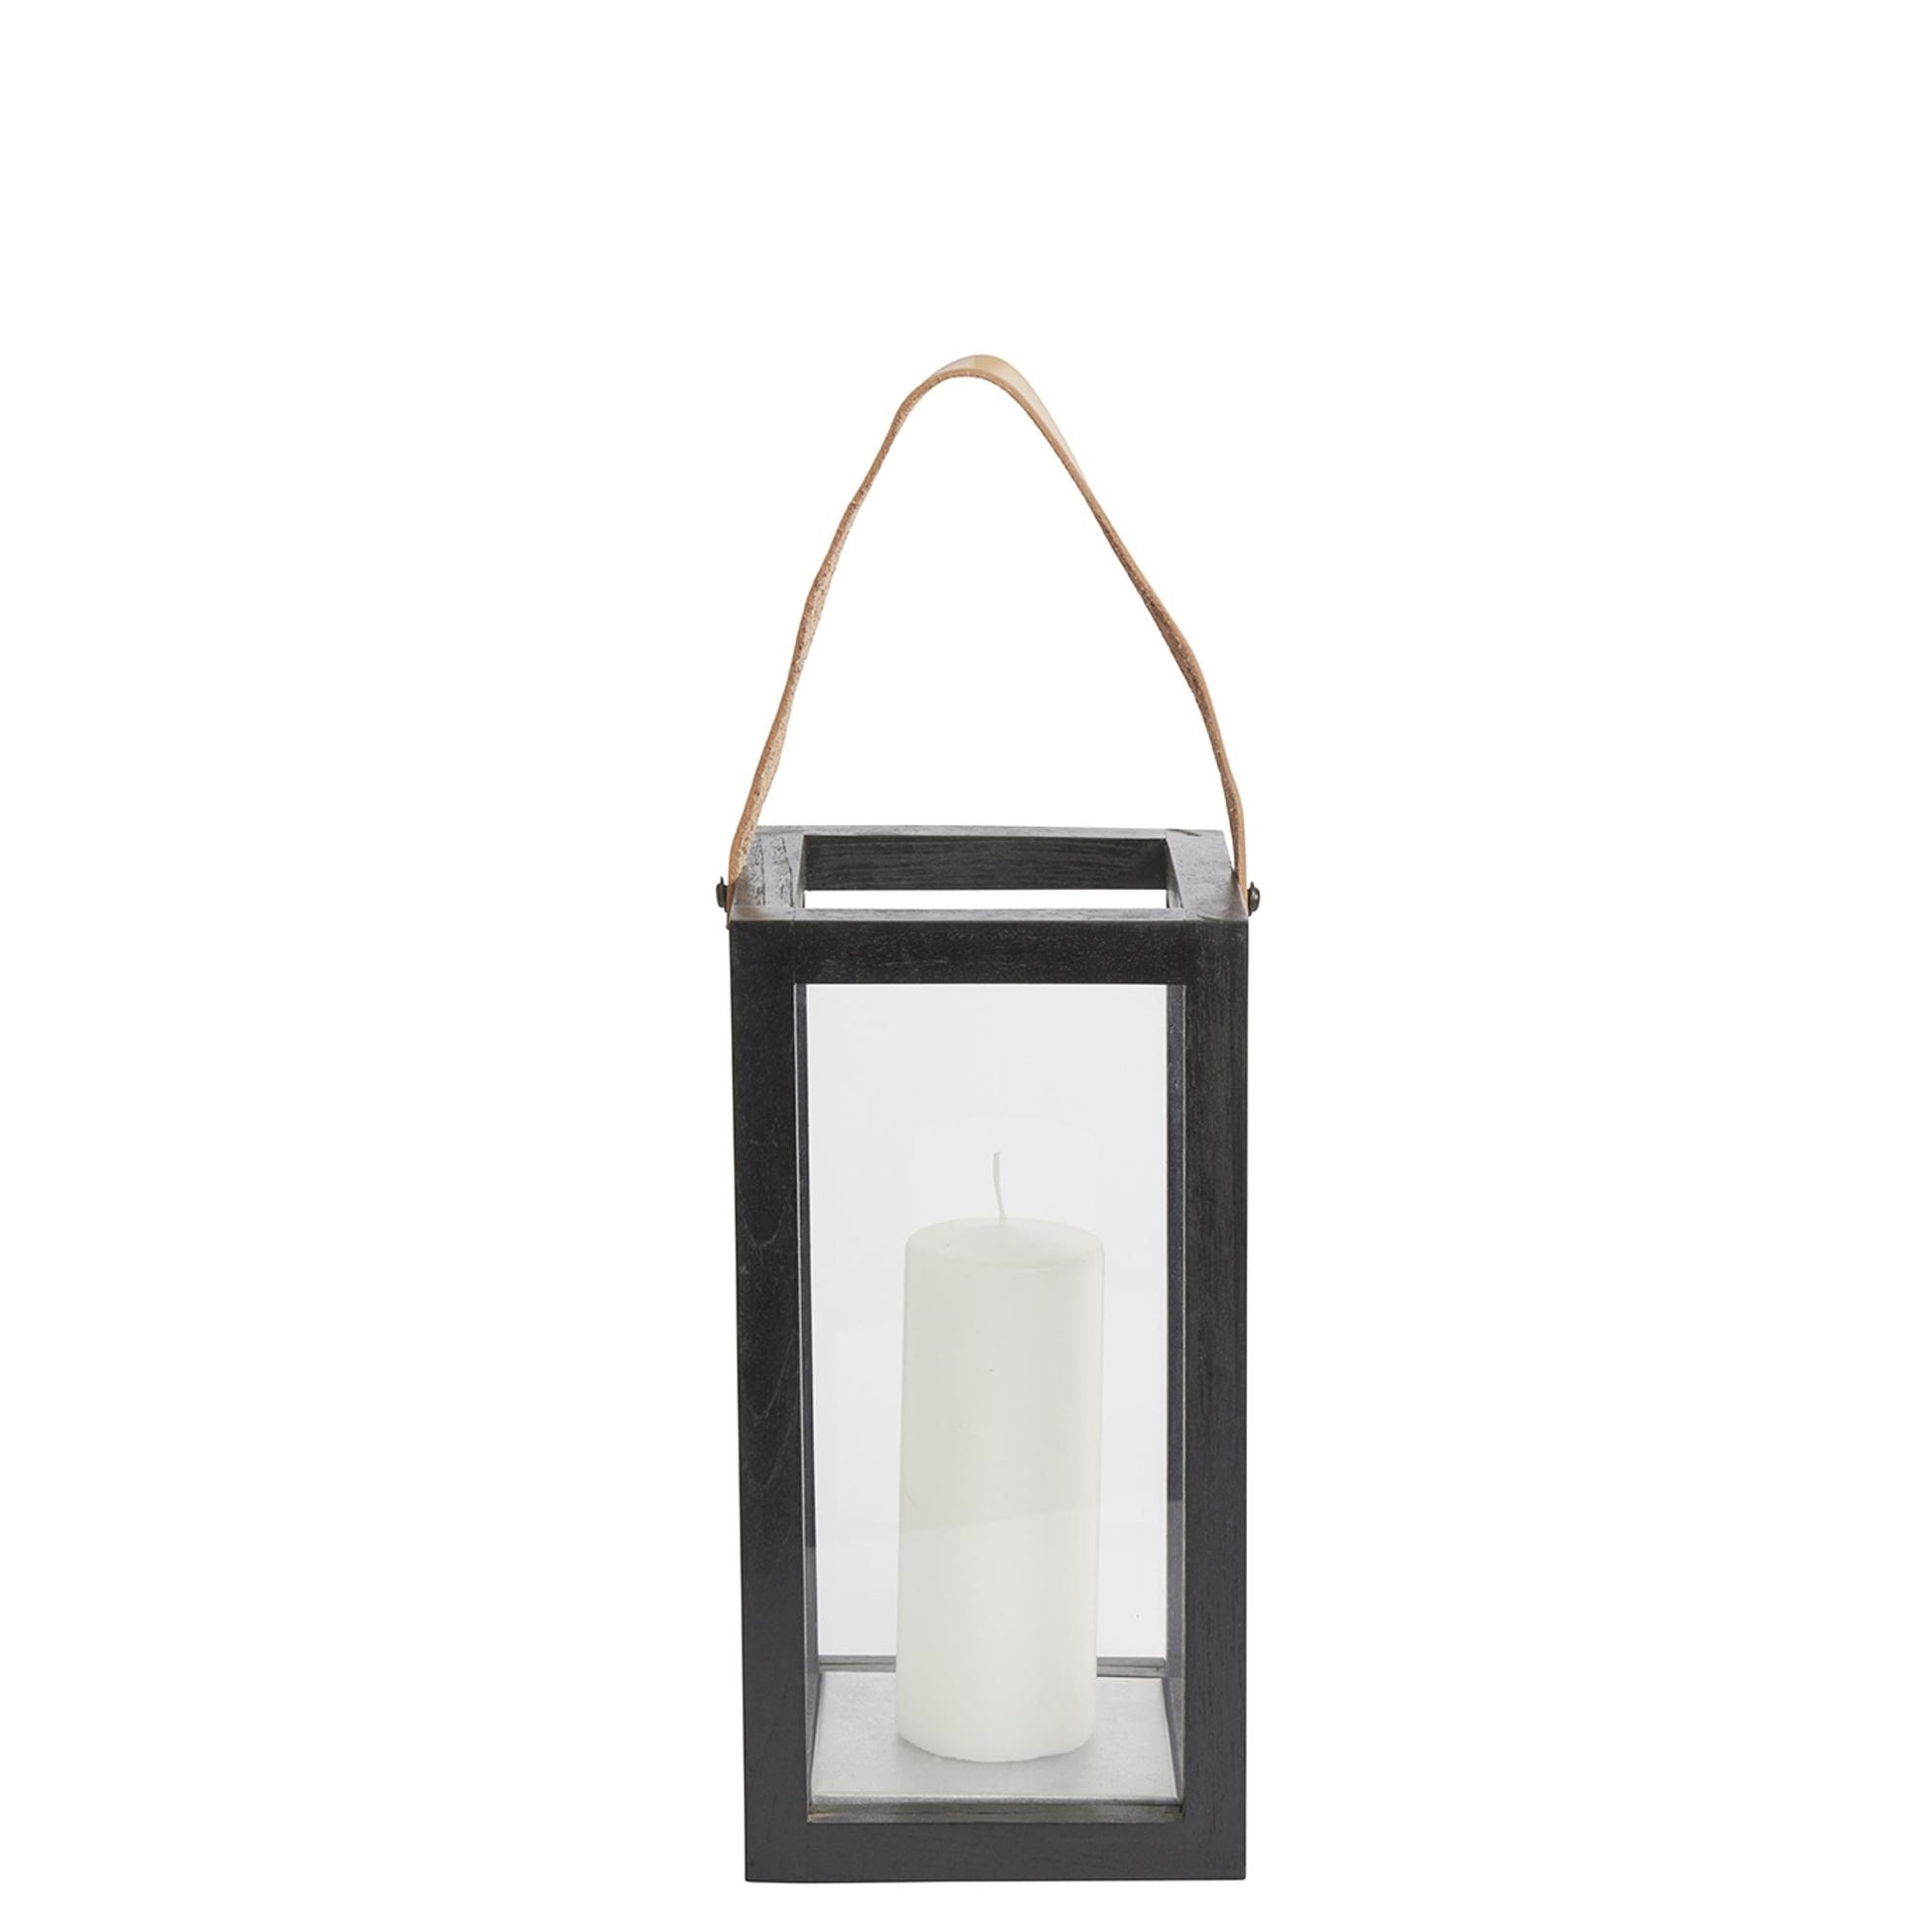 Storm Lantern Small by Muubs #Black